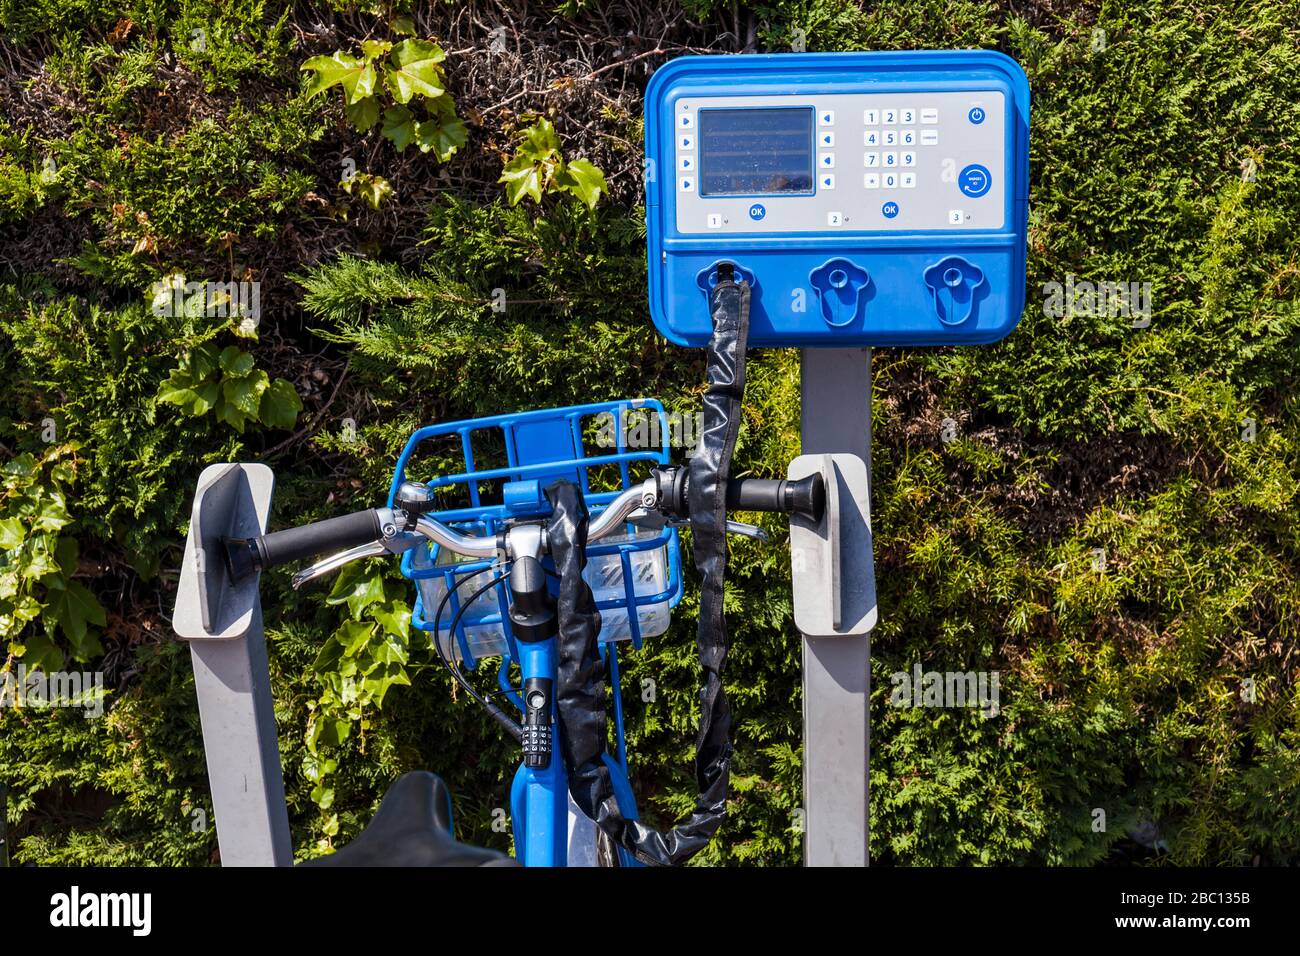 France, Alpes-Maritimes, Cagnes-sur-Mer, Bicycle renting station Stock Photo